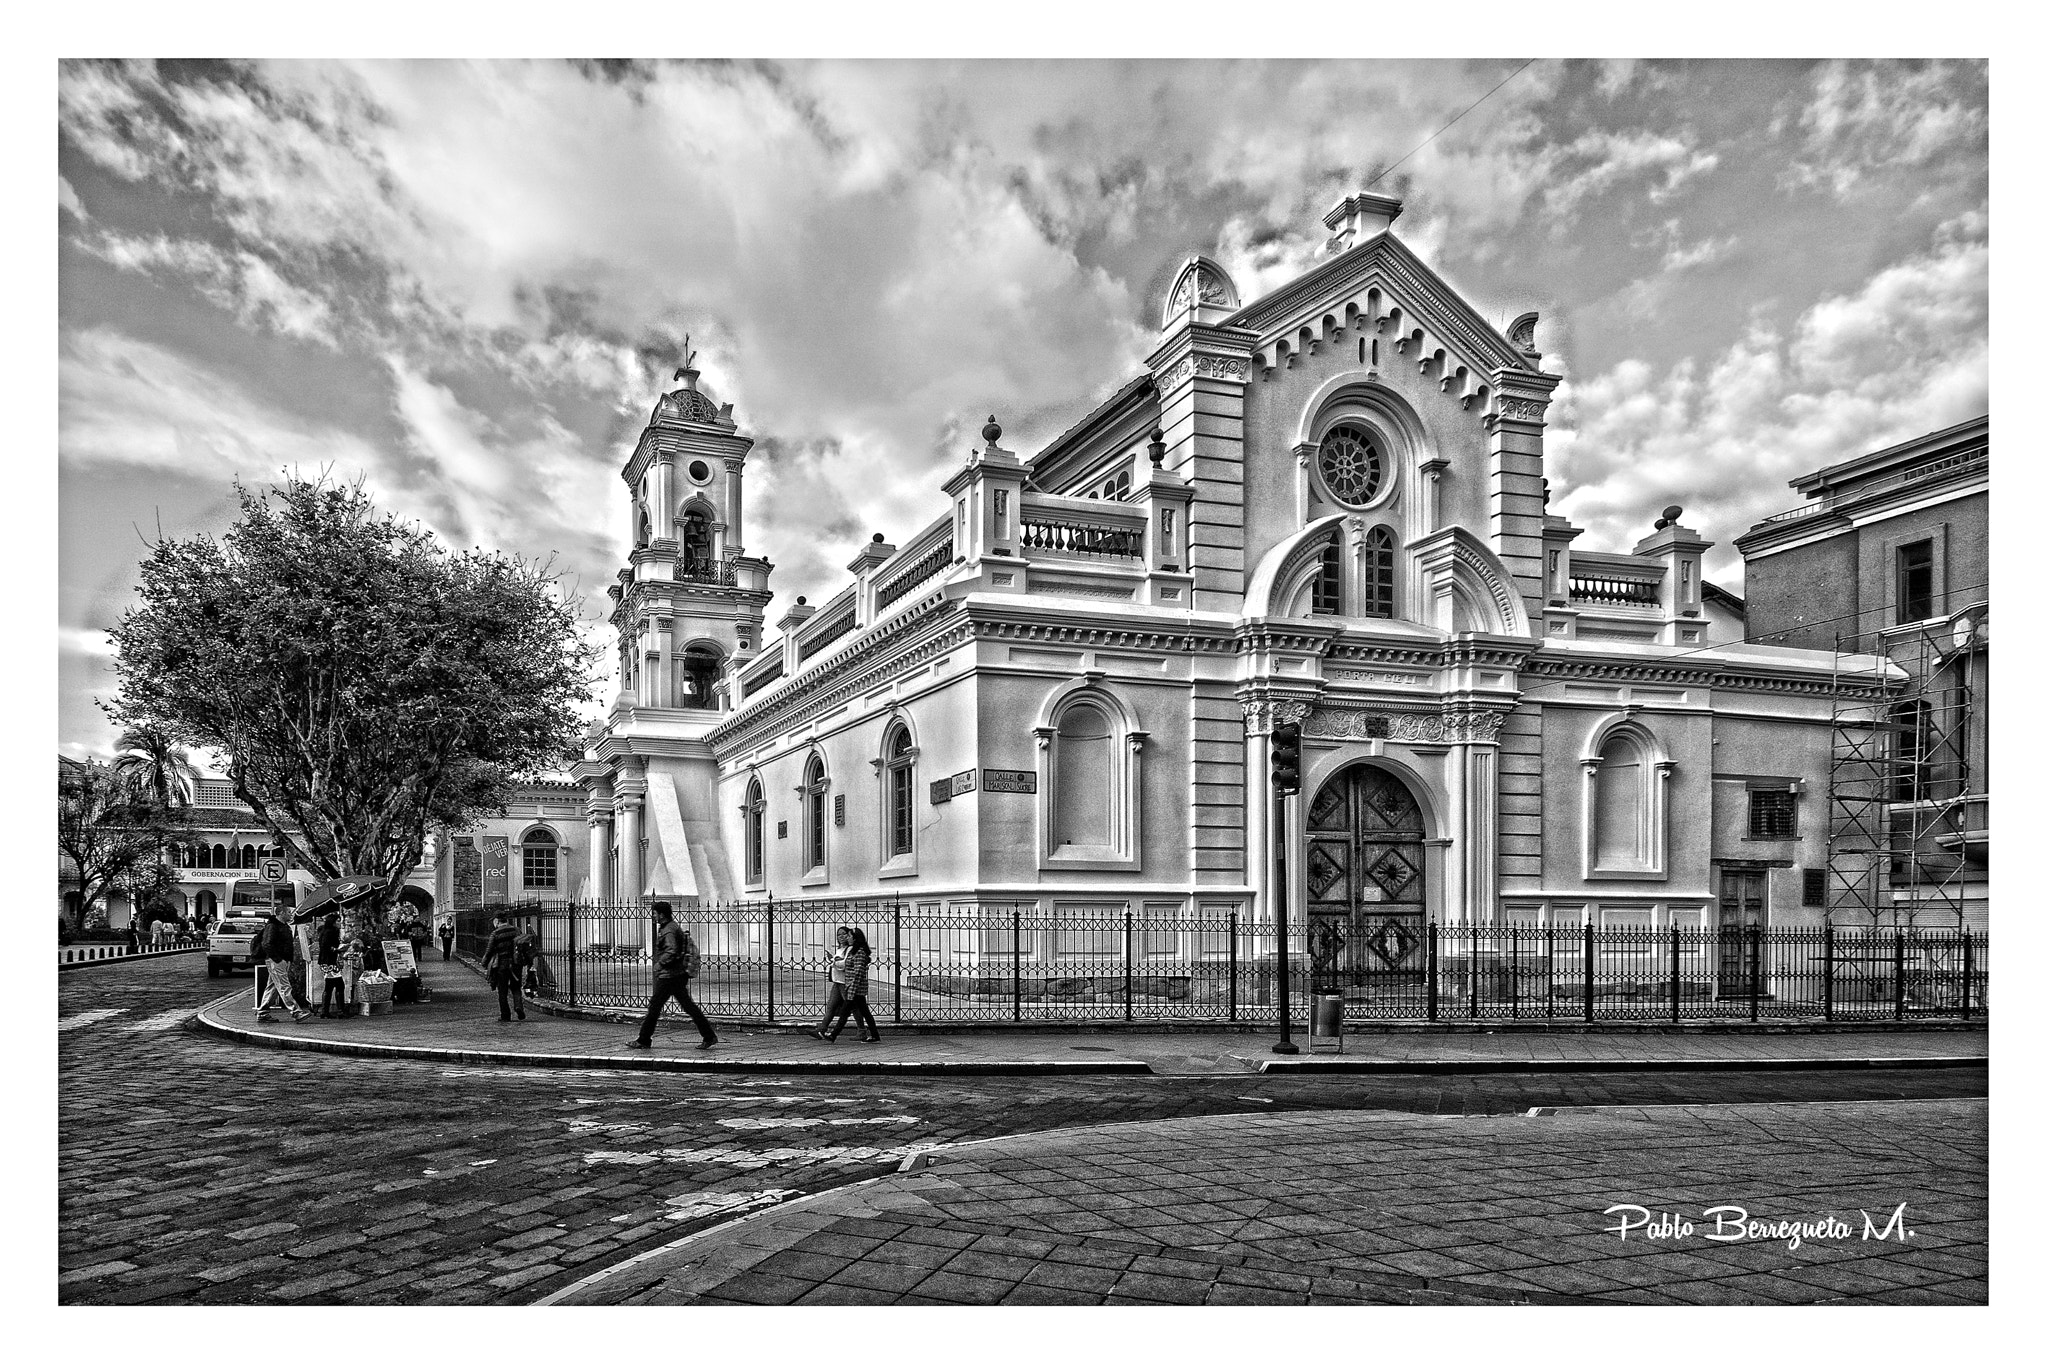 Sony ILCA-77M2 + Tamron SP AF 10-24mm F3.5-4.5 Di II LD Aspherical (IF) sample photo. Catedral vieja cuenca ecuador photography